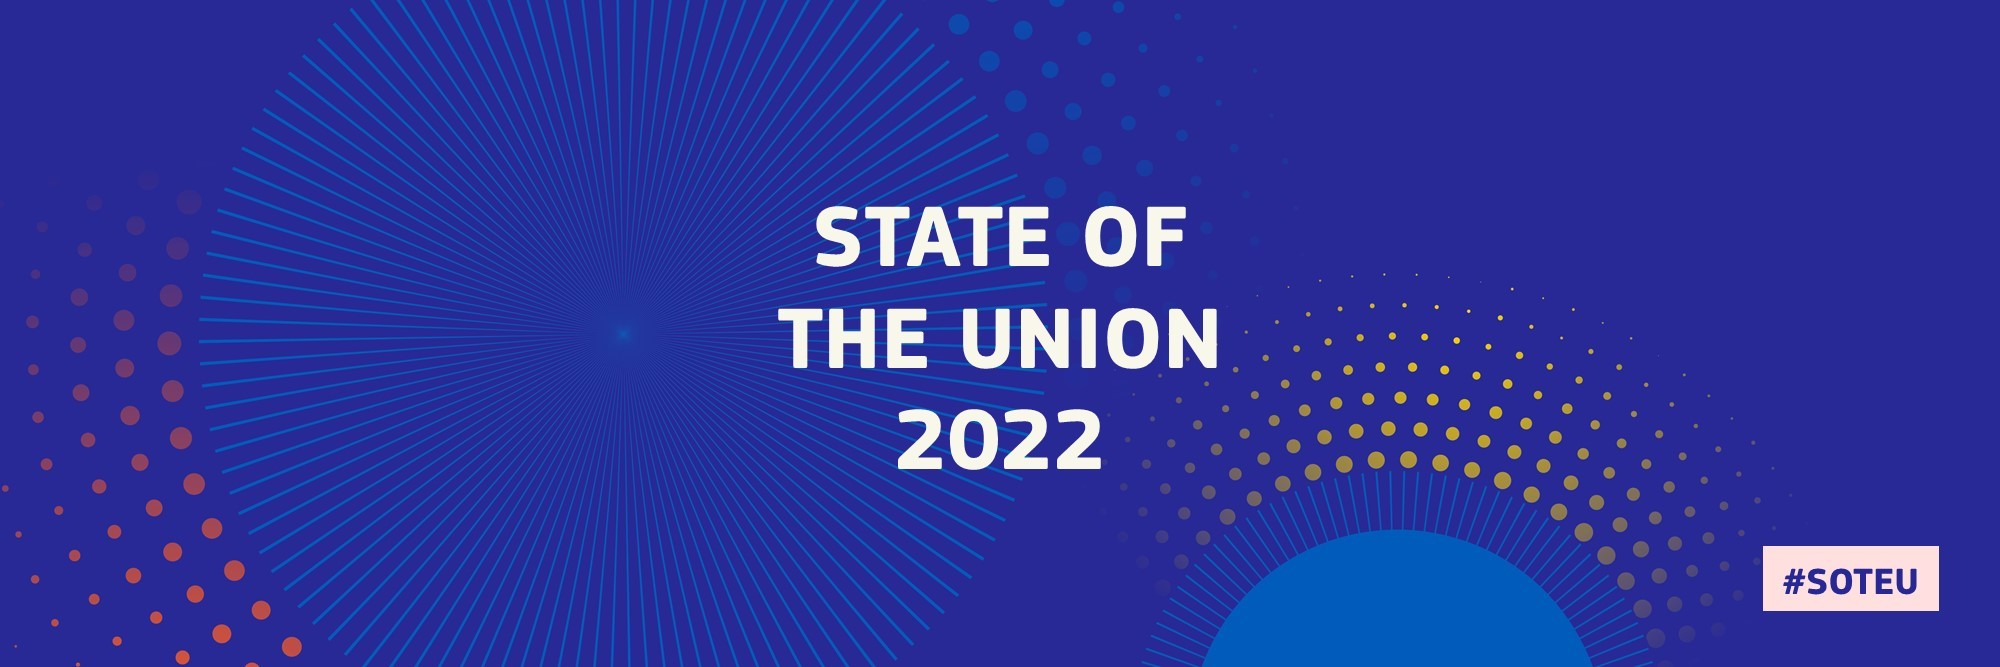 state of union 2022 abstract illustration #SOTEU2022